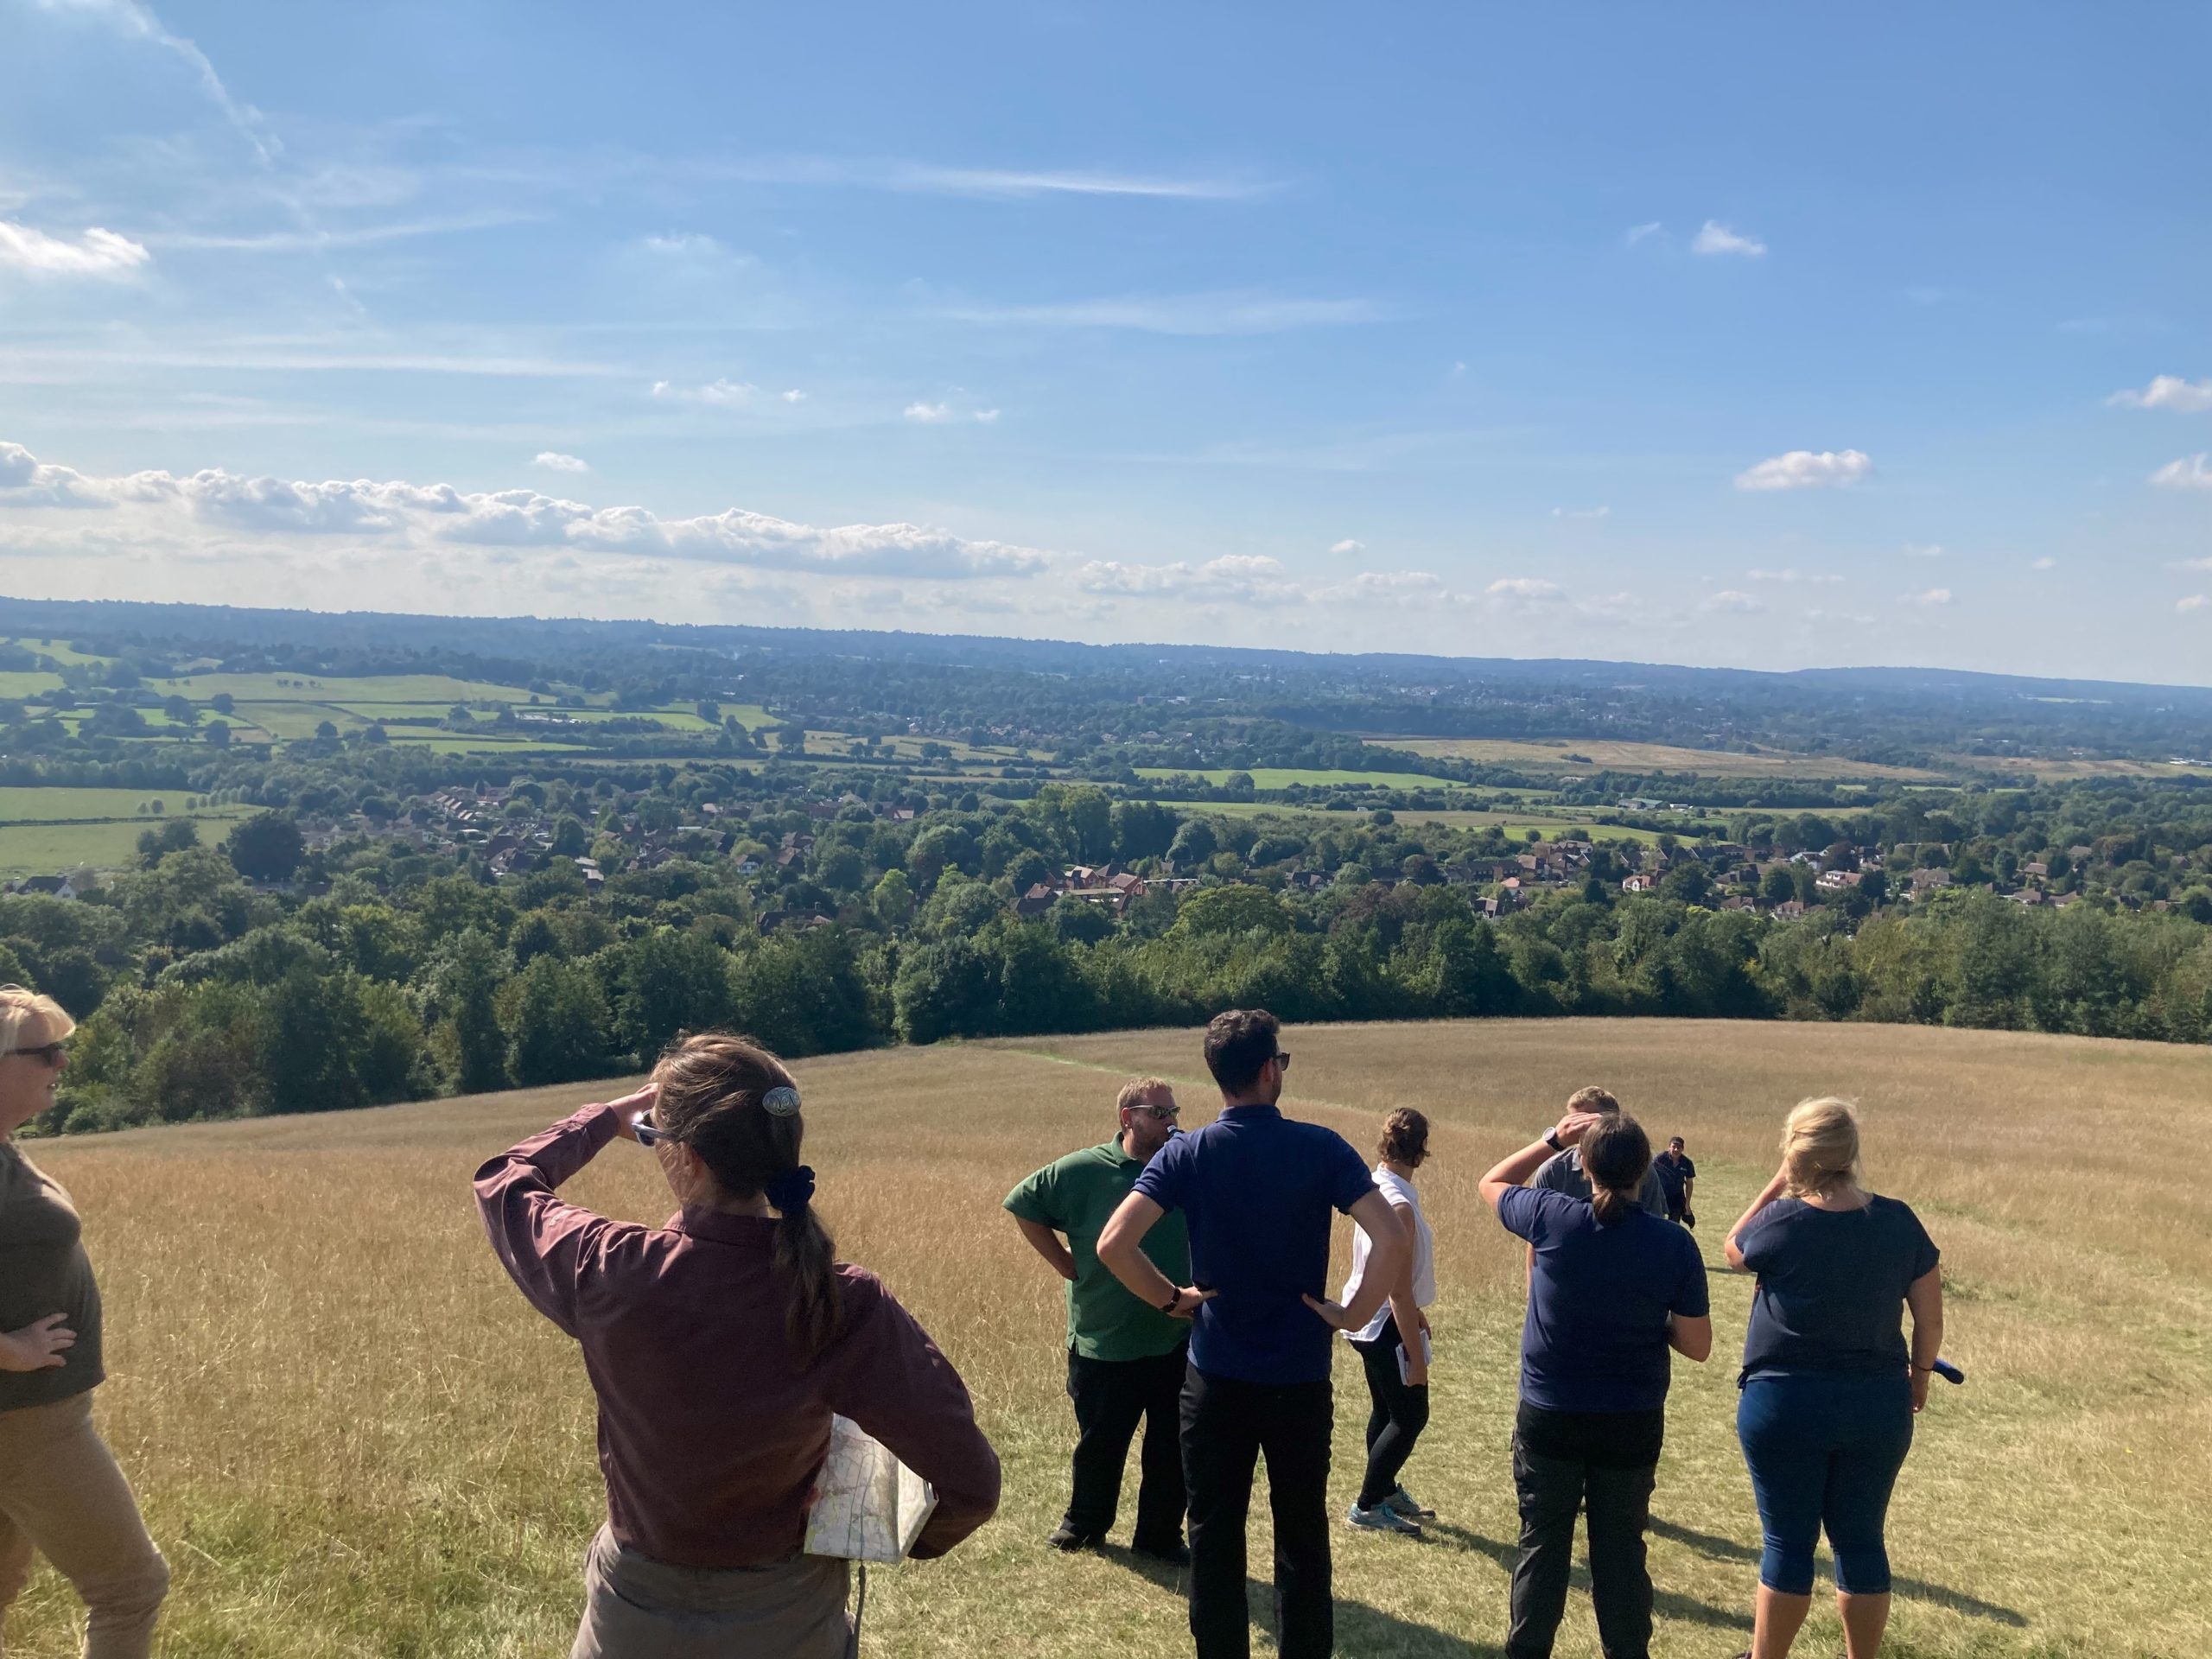 People stood on top of field looking at view